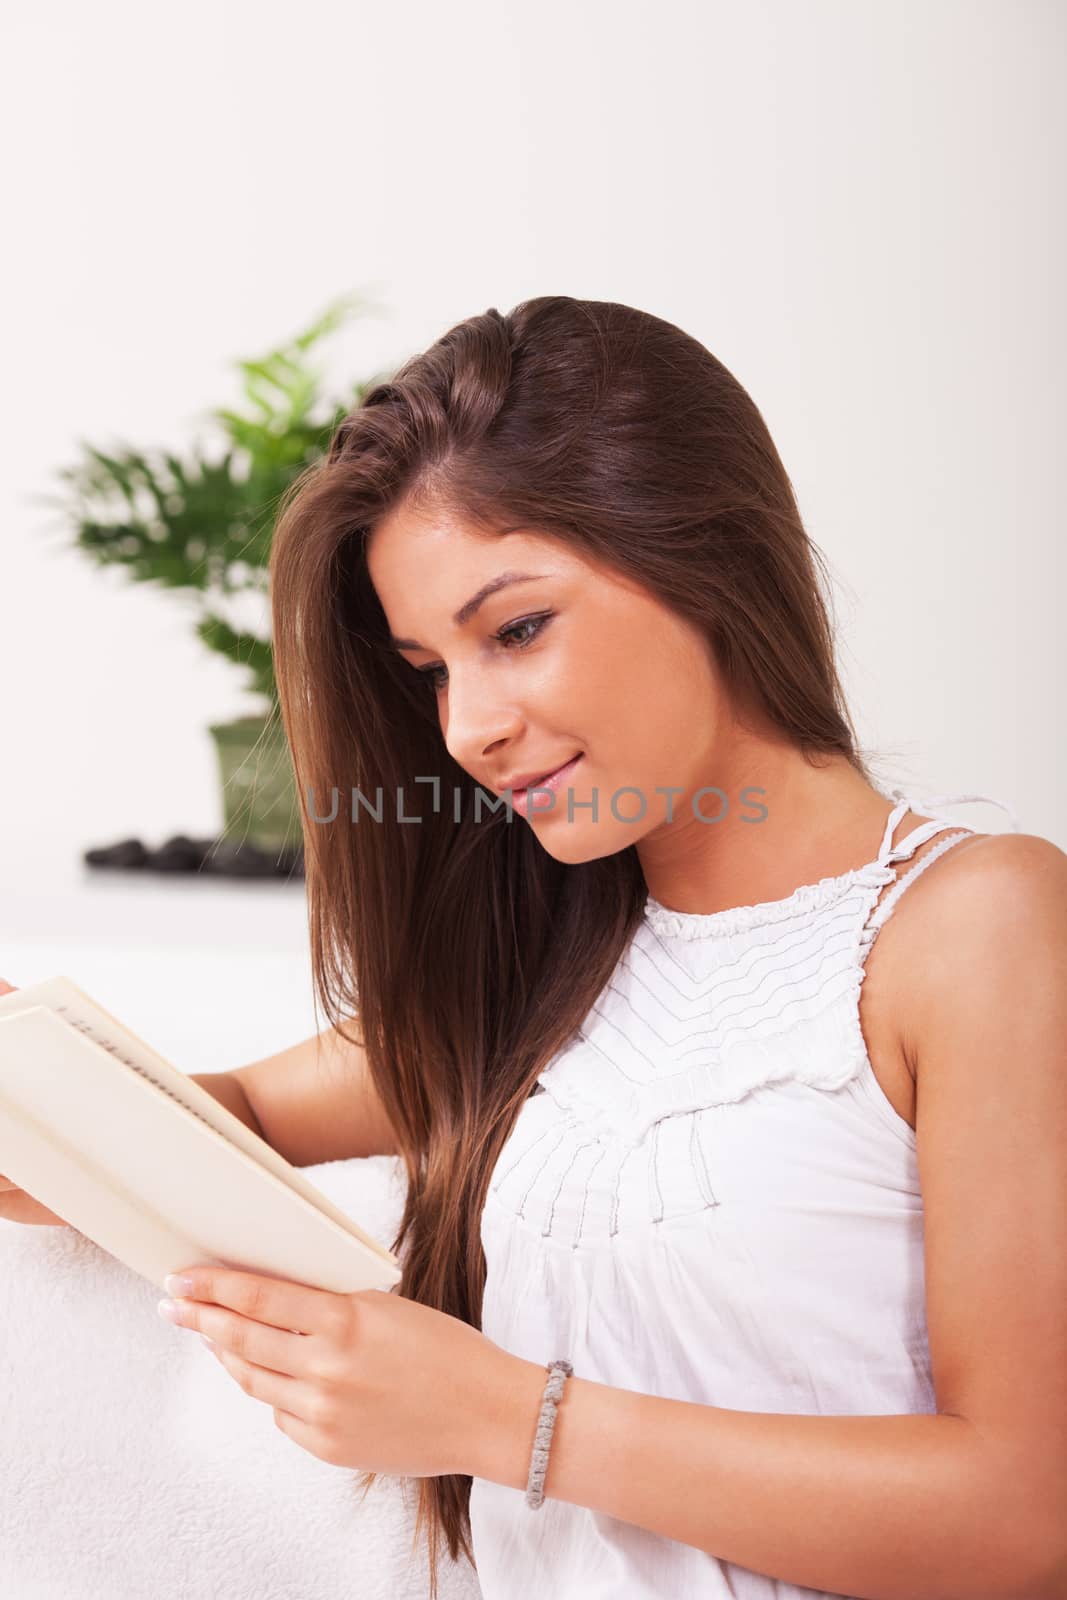 Beautiful young girl sitting and reading a book.